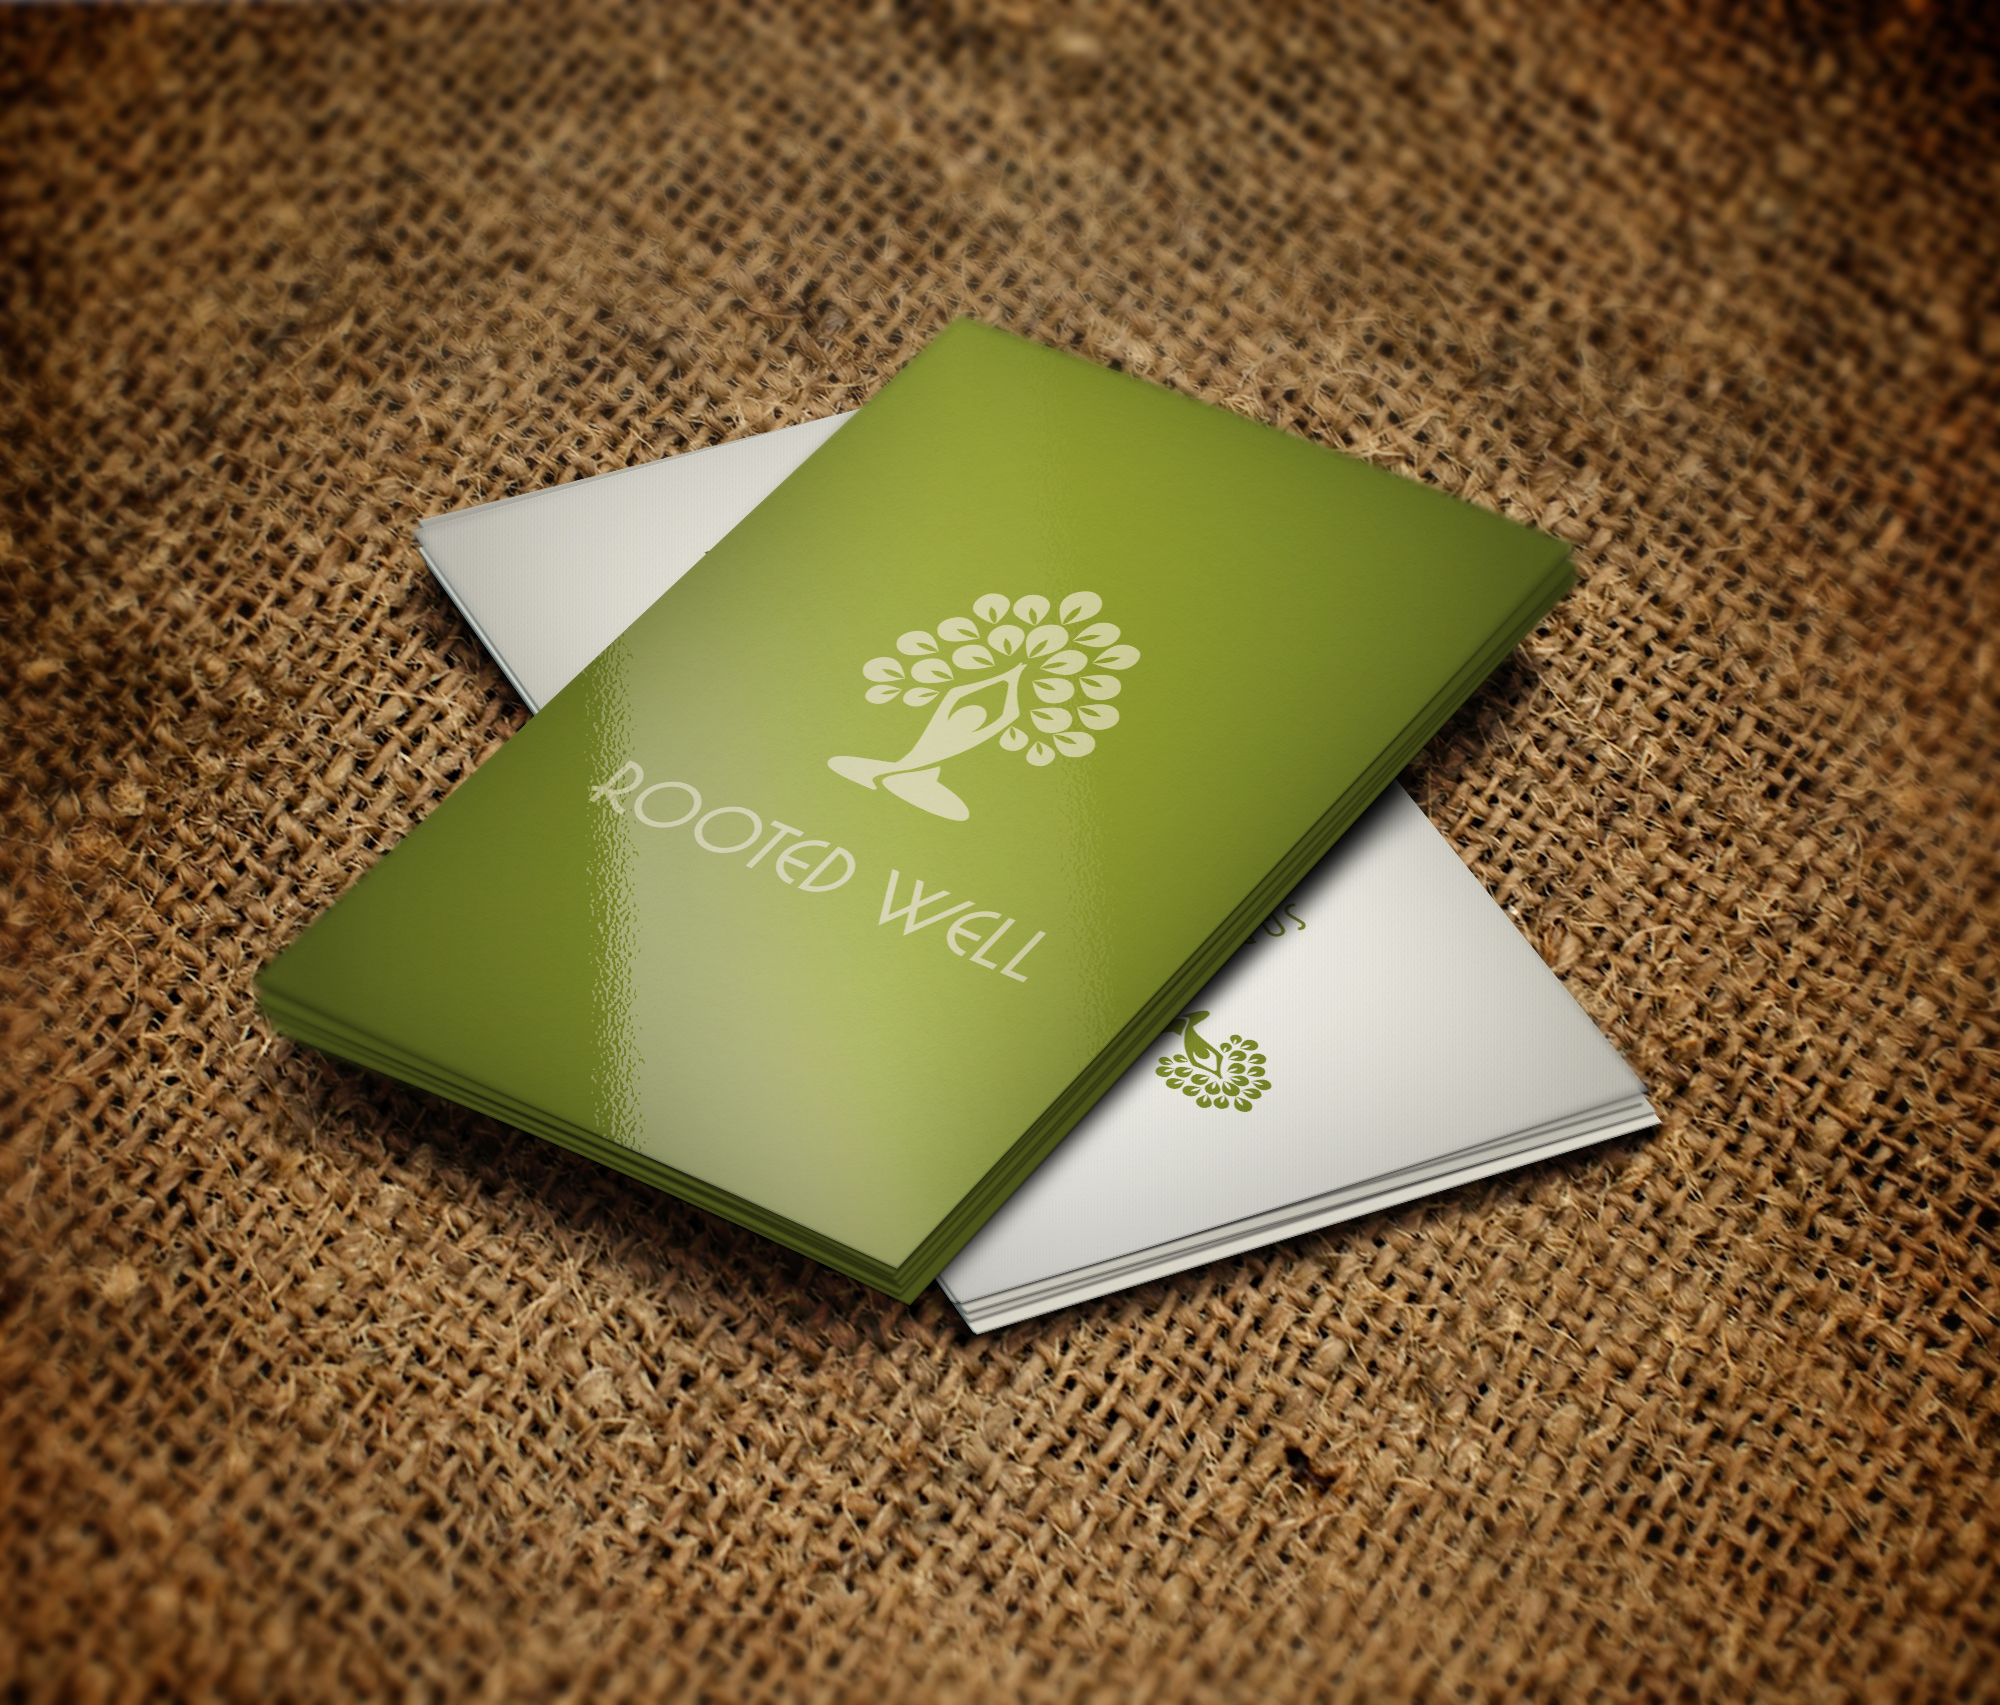 Rooted Well final Business Card designed by Xoil Design